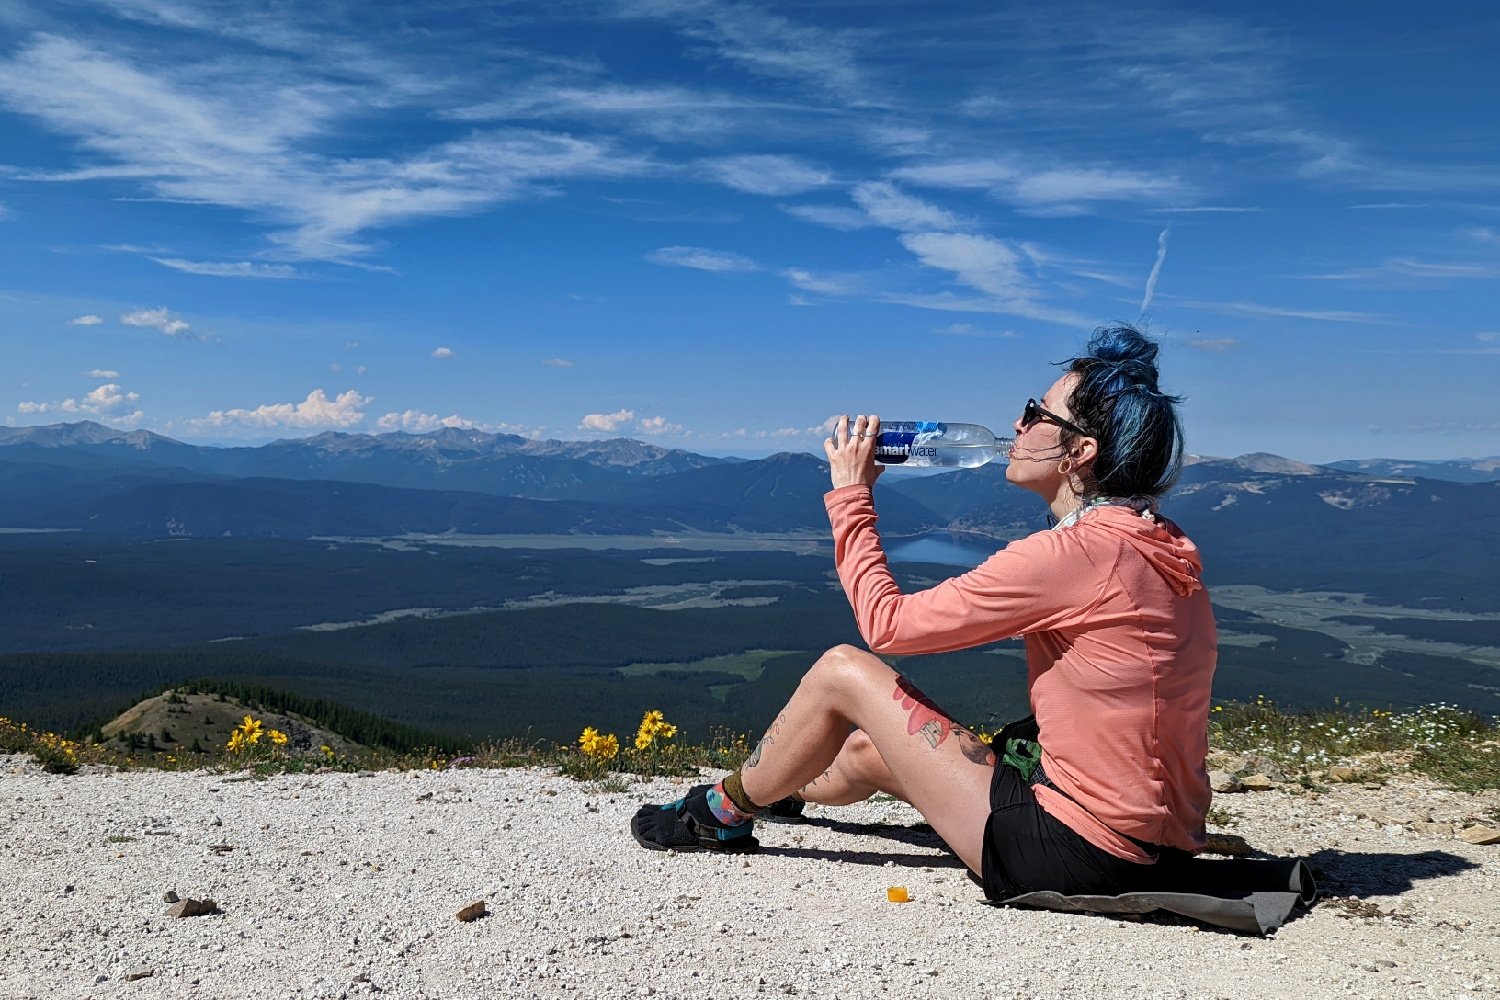 A hiker sitting on a mountain pass drinking out of a smartwater bottle